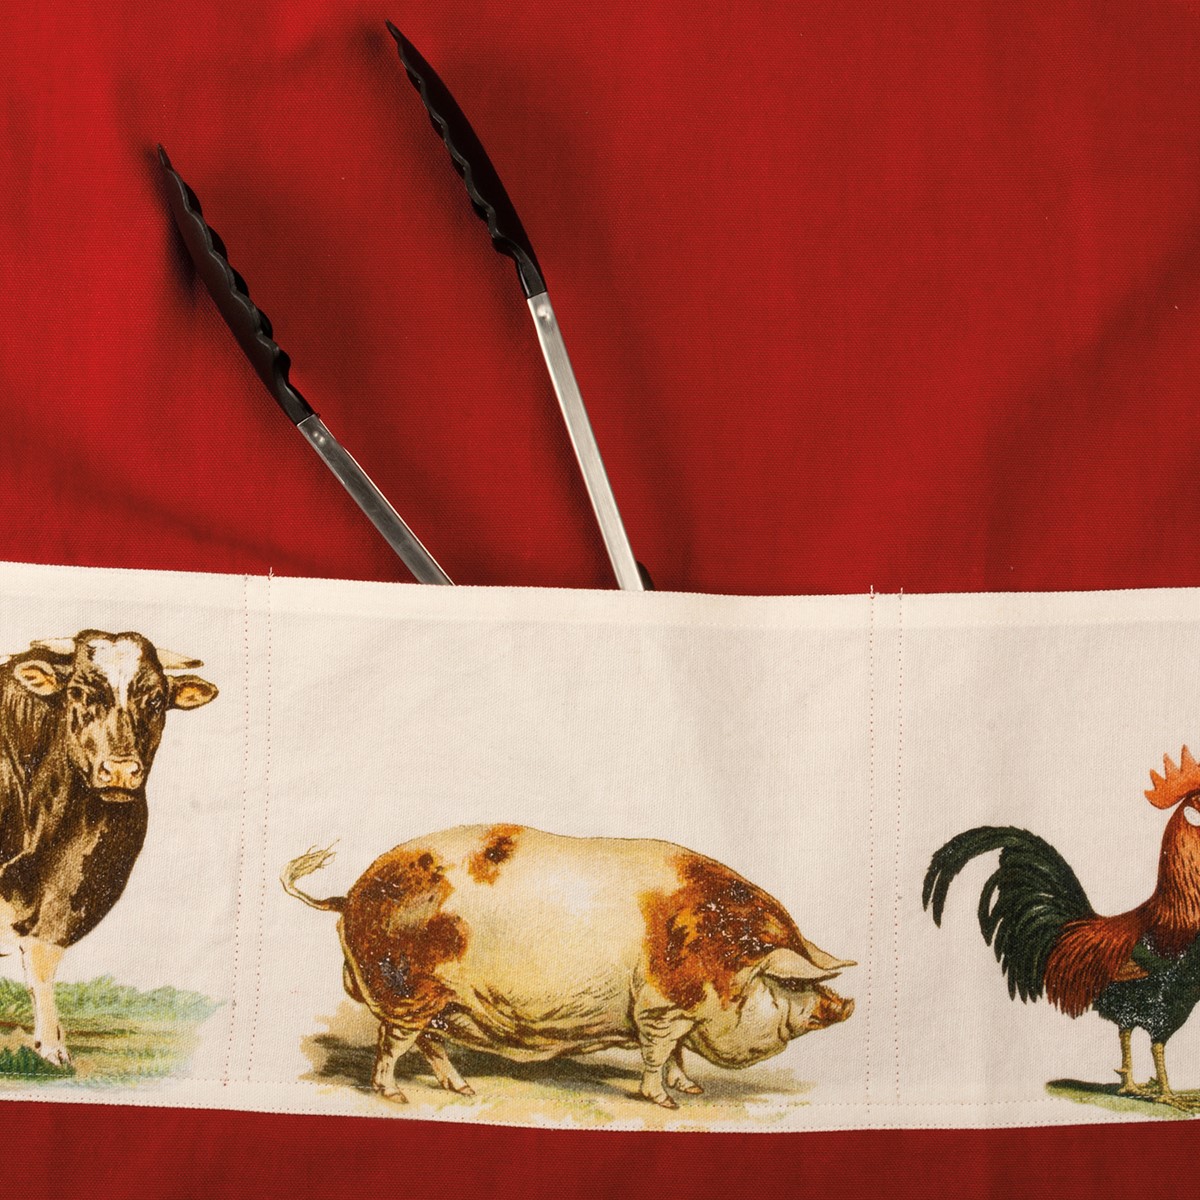 Apron - Cow Pig & Chicken Walk Into A BBQ The End - 27.50" x 28" - Cotton, Metal